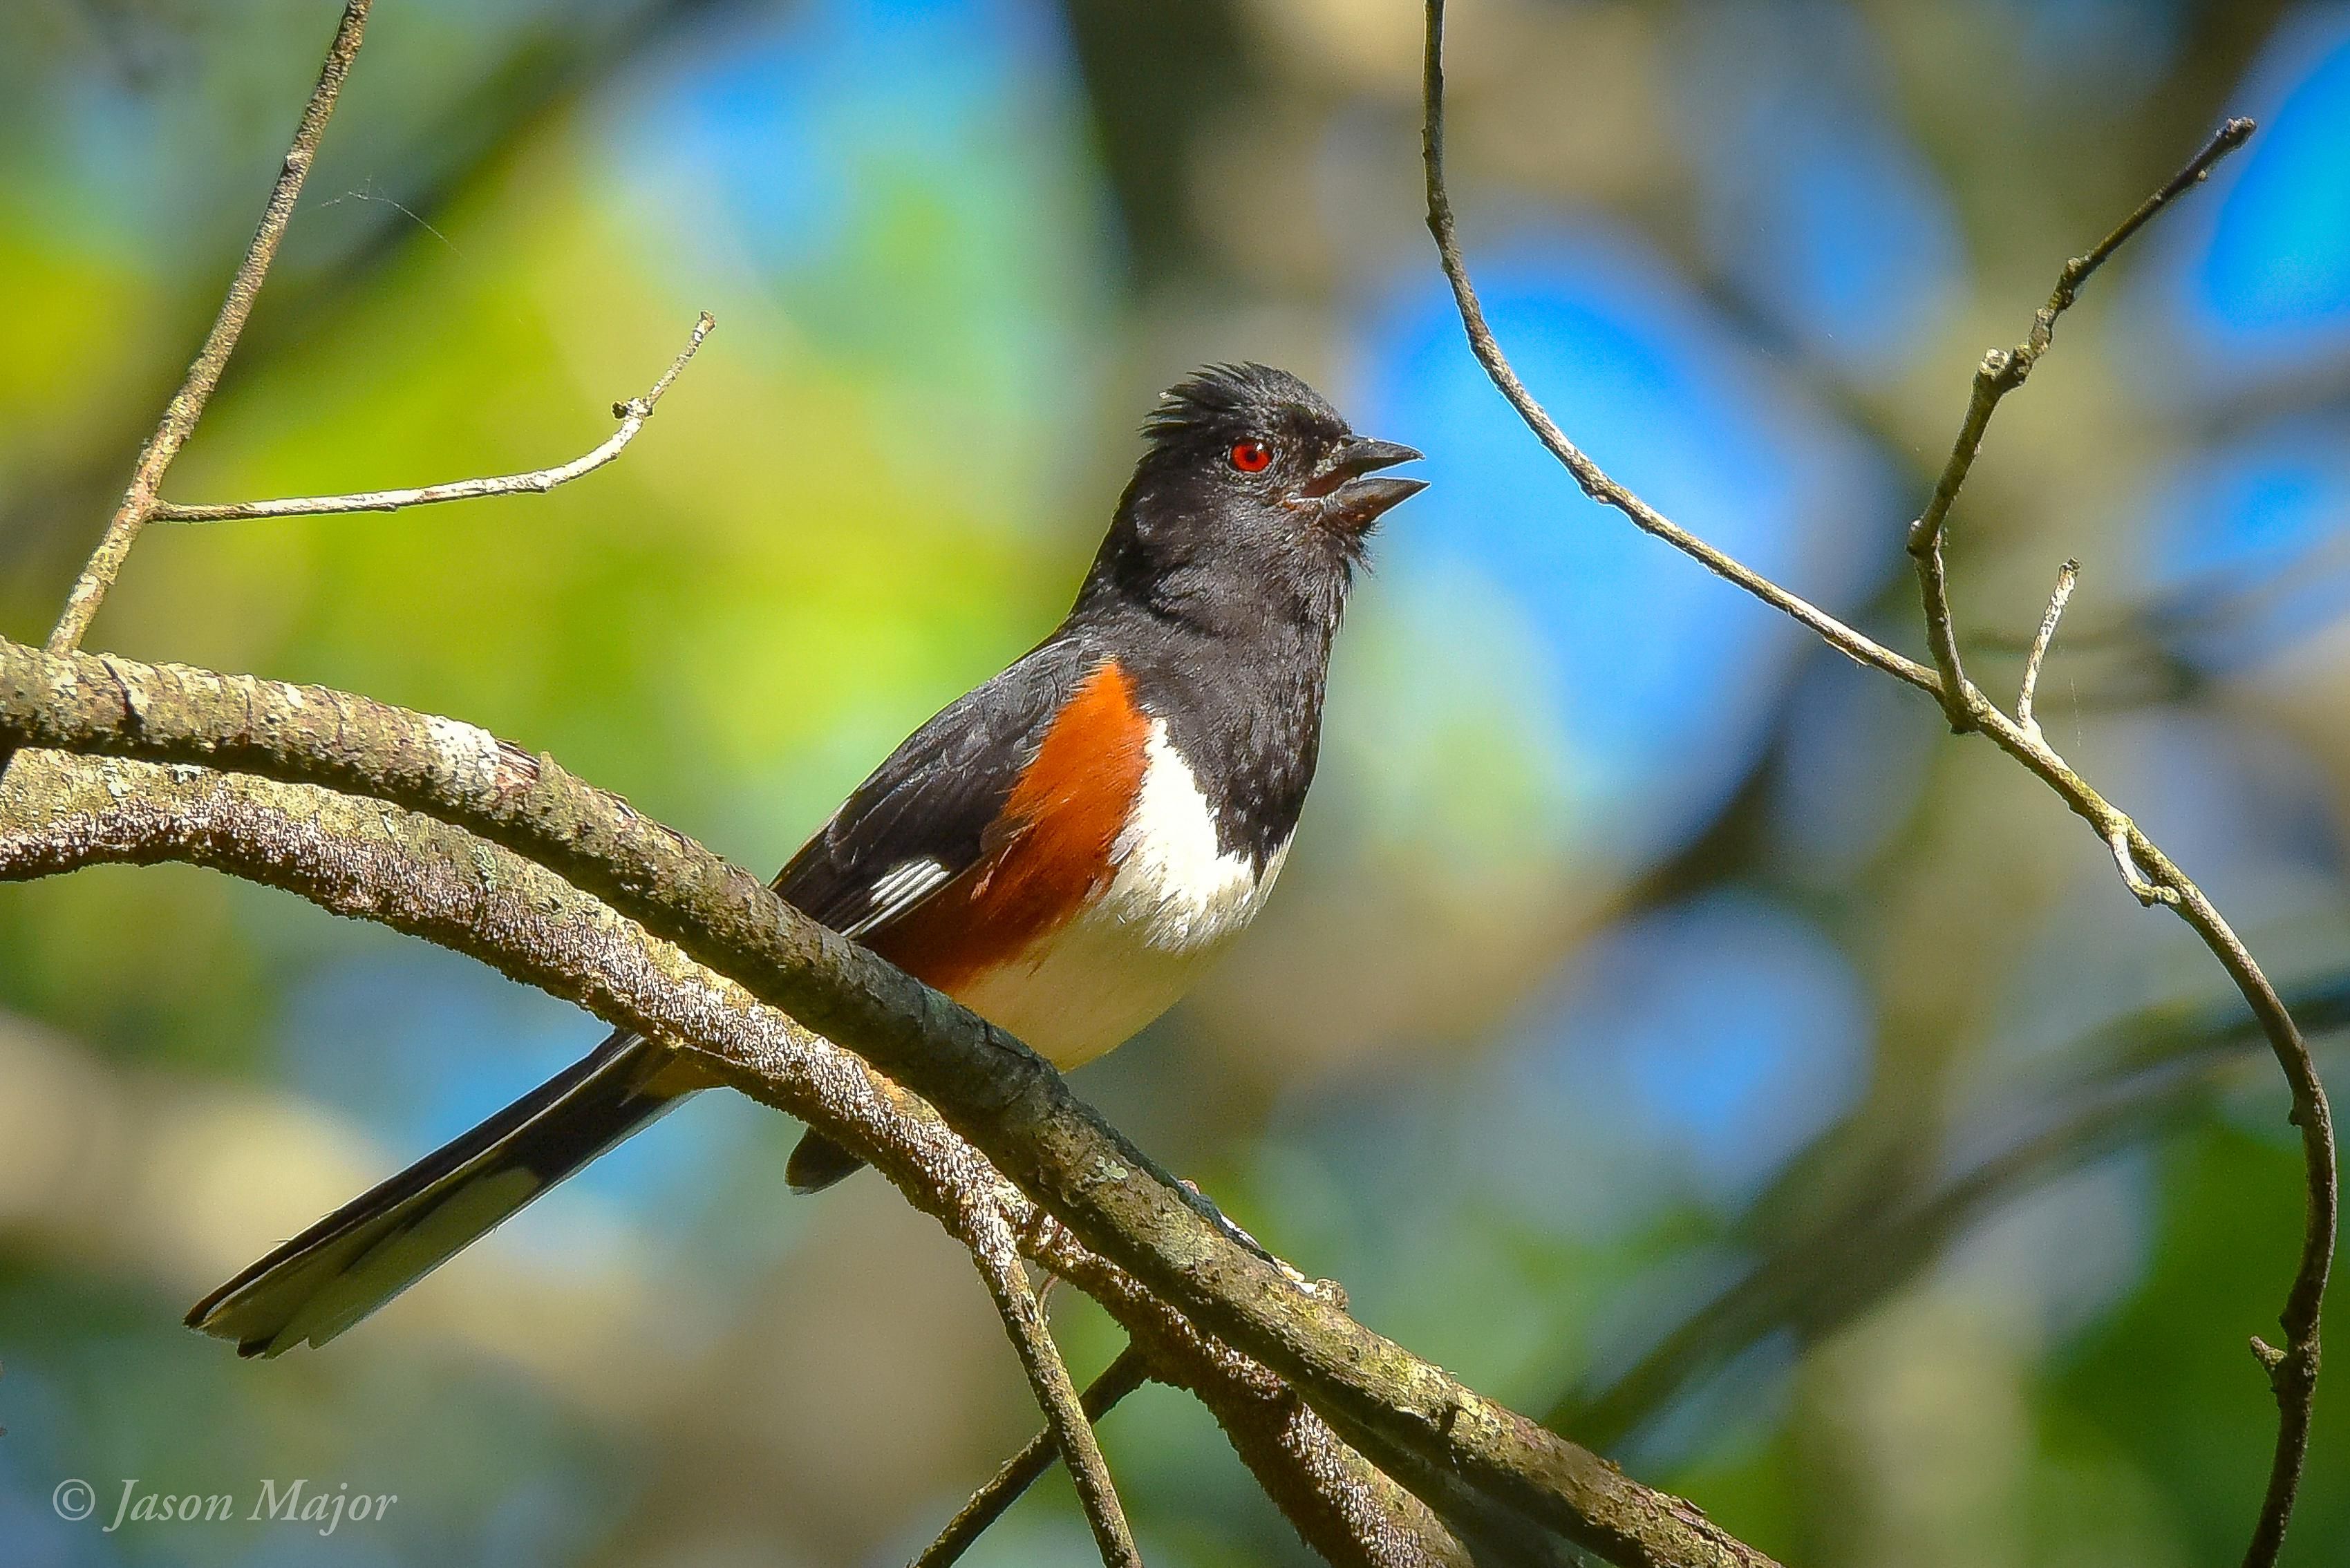 A small bird with a black head, white breast, and red shoulders perches on a tree branch.